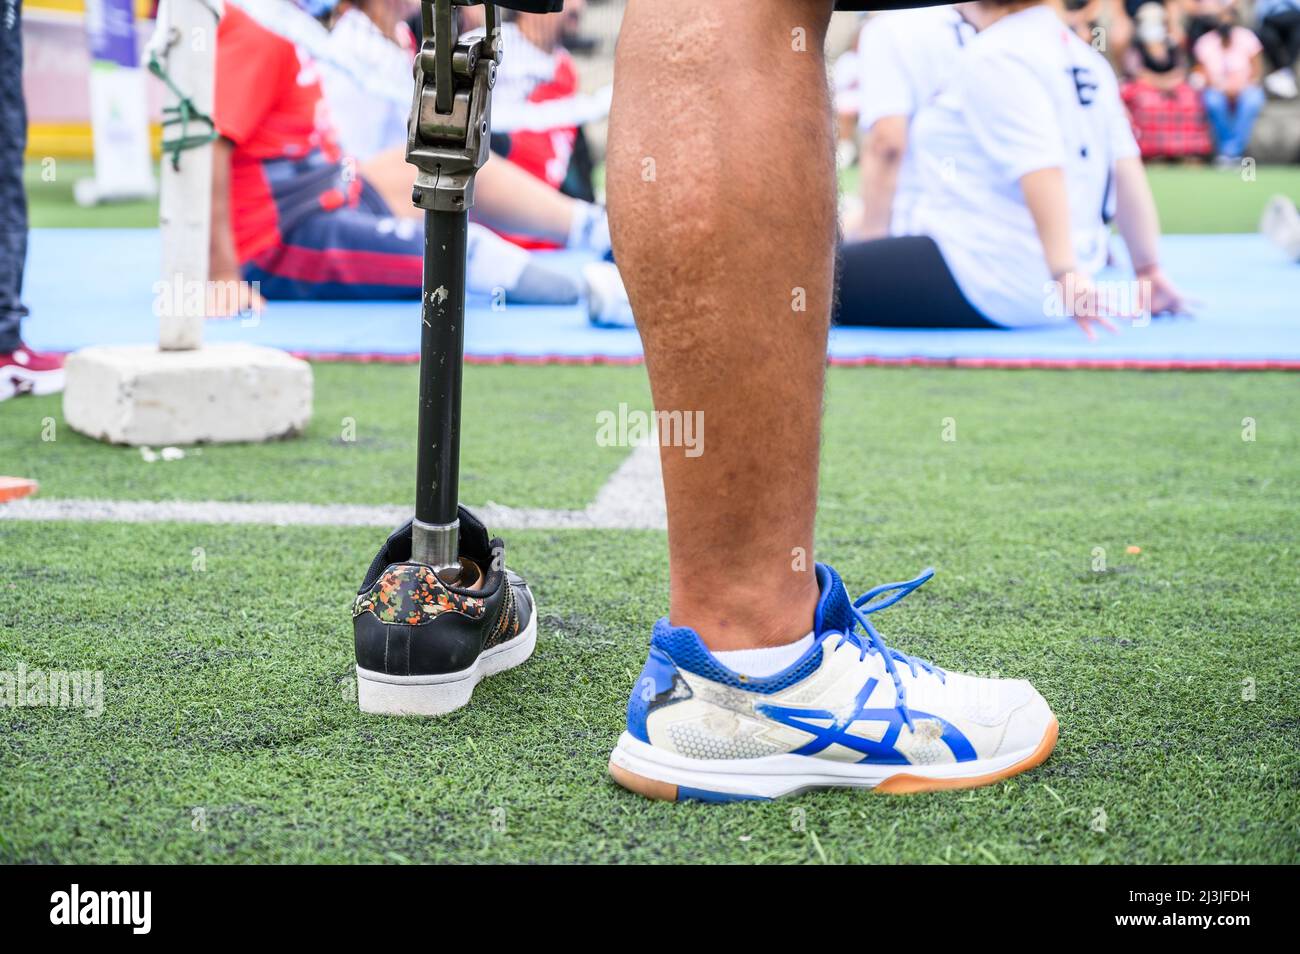 Unrecognizable male athlete with a prosthetic leg Stock Photo